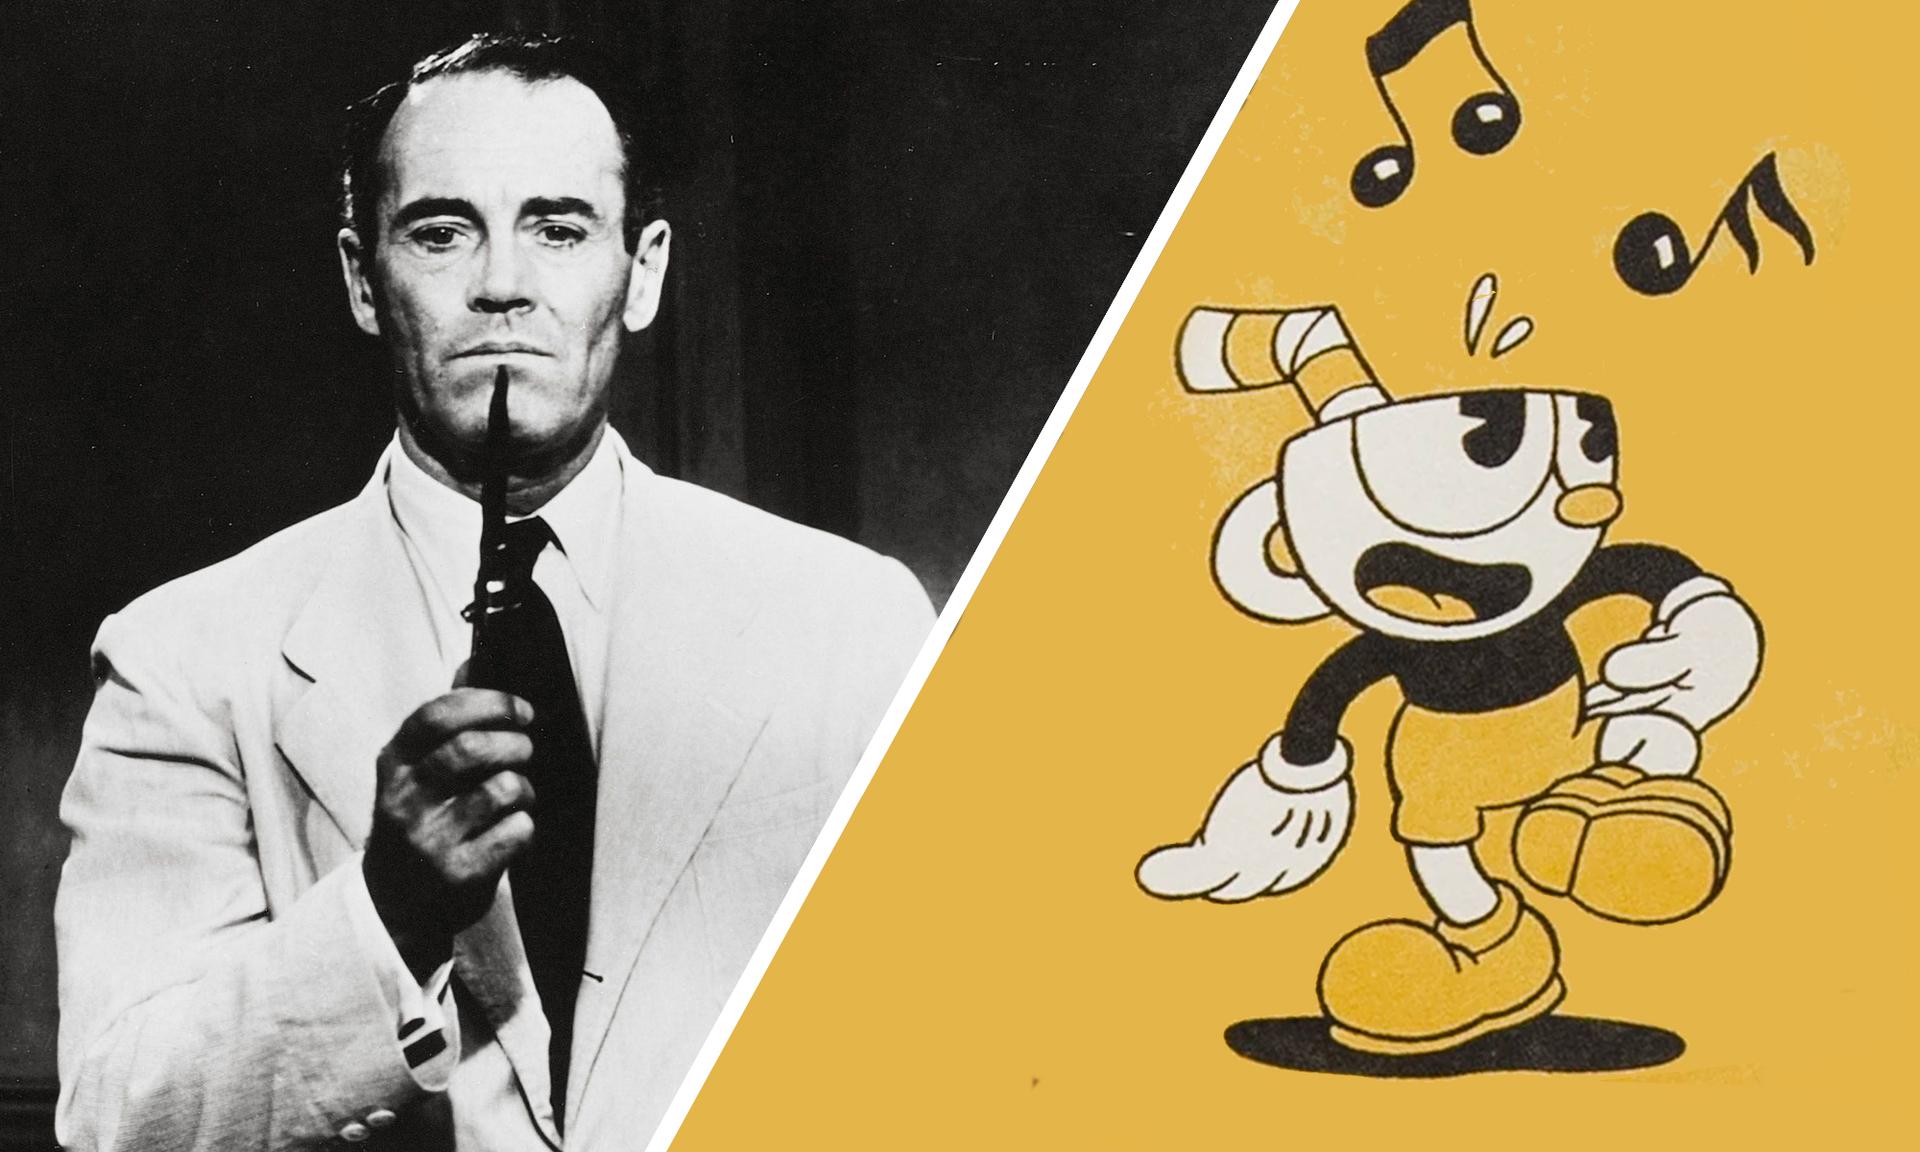 Henry Fonda in “12 Angry Men” and Cuphead.